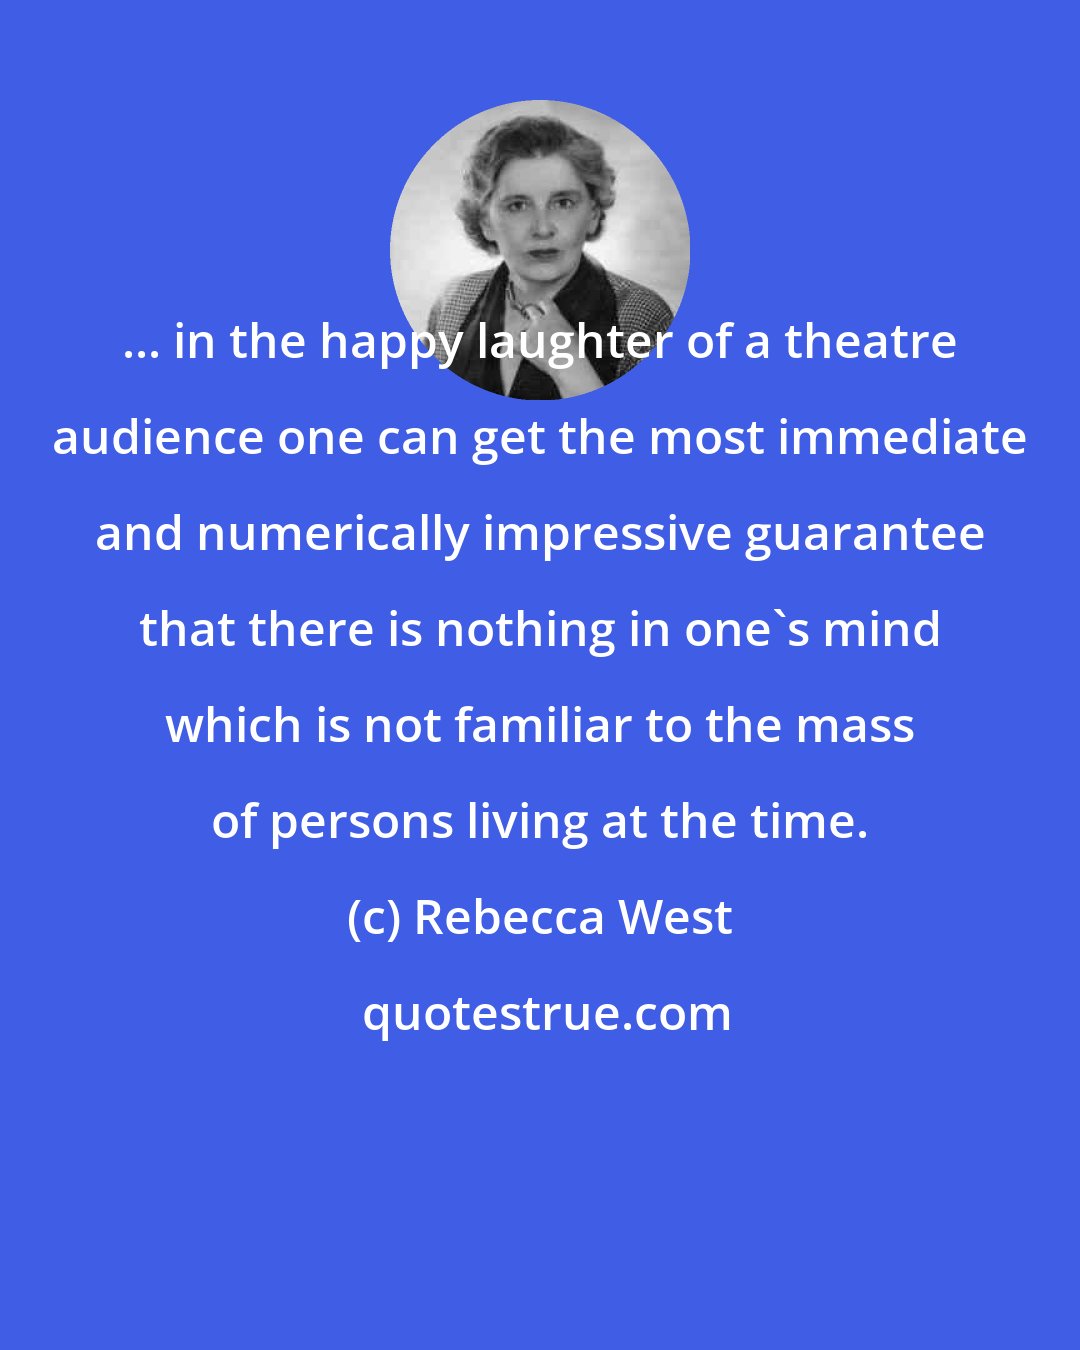 Rebecca West: ... in the happy laughter of a theatre audience one can get the most immediate and numerically impressive guarantee that there is nothing in one's mind which is not familiar to the mass of persons living at the time.